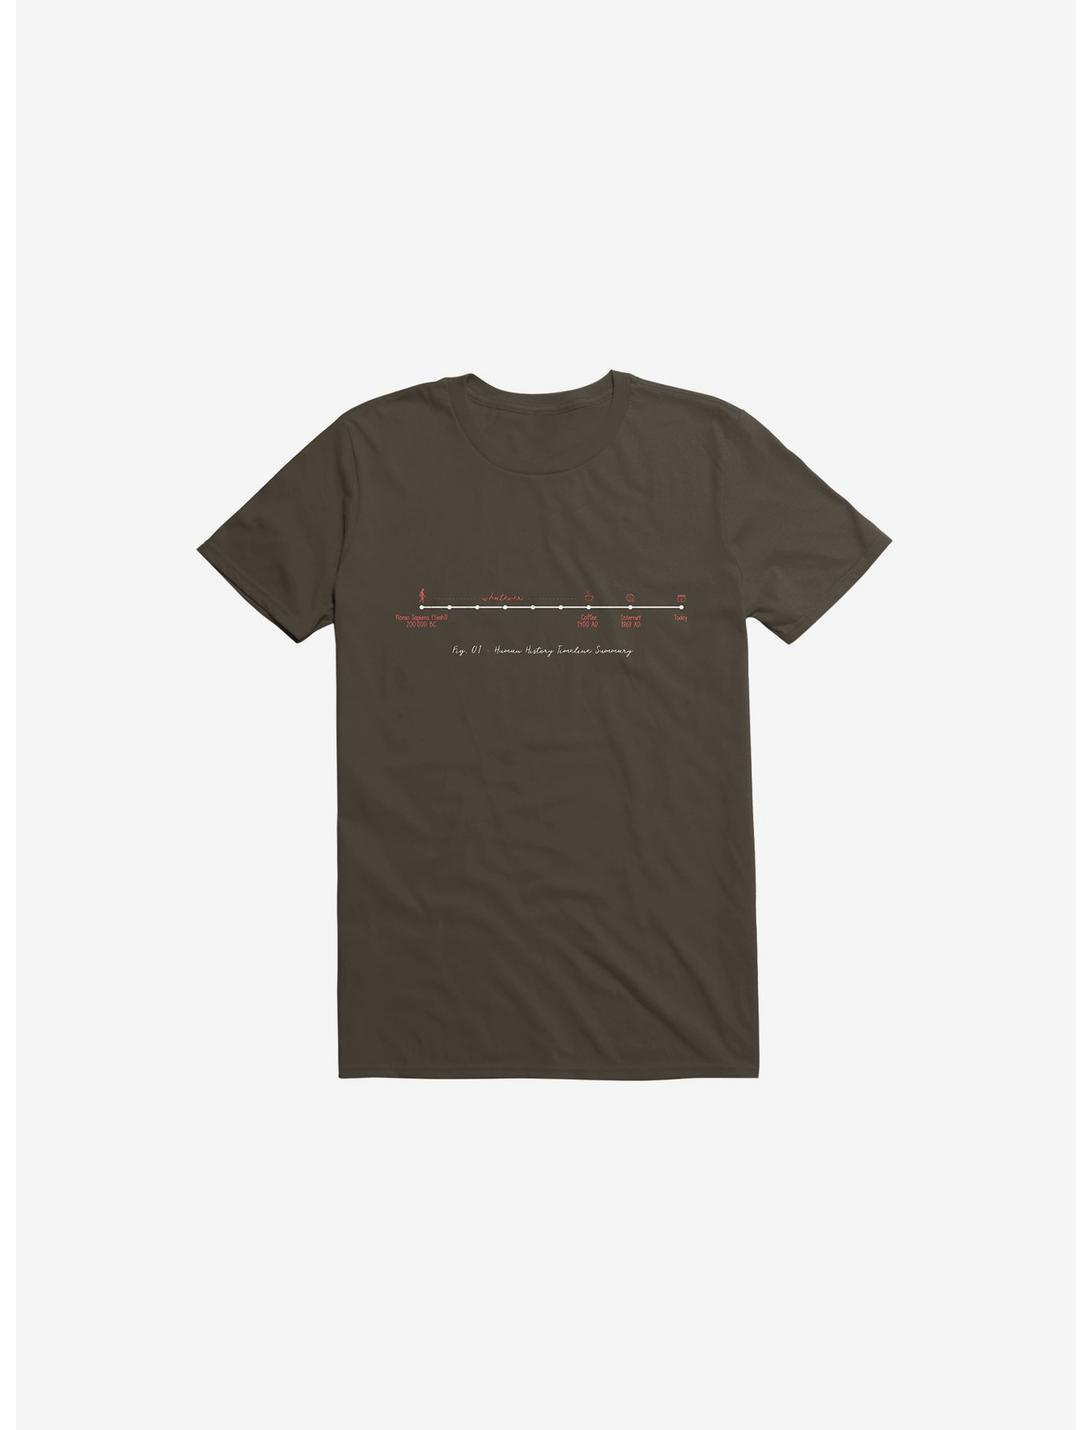 Human History Timeline Summary Brown T-Shirt, BROWN, hi-res